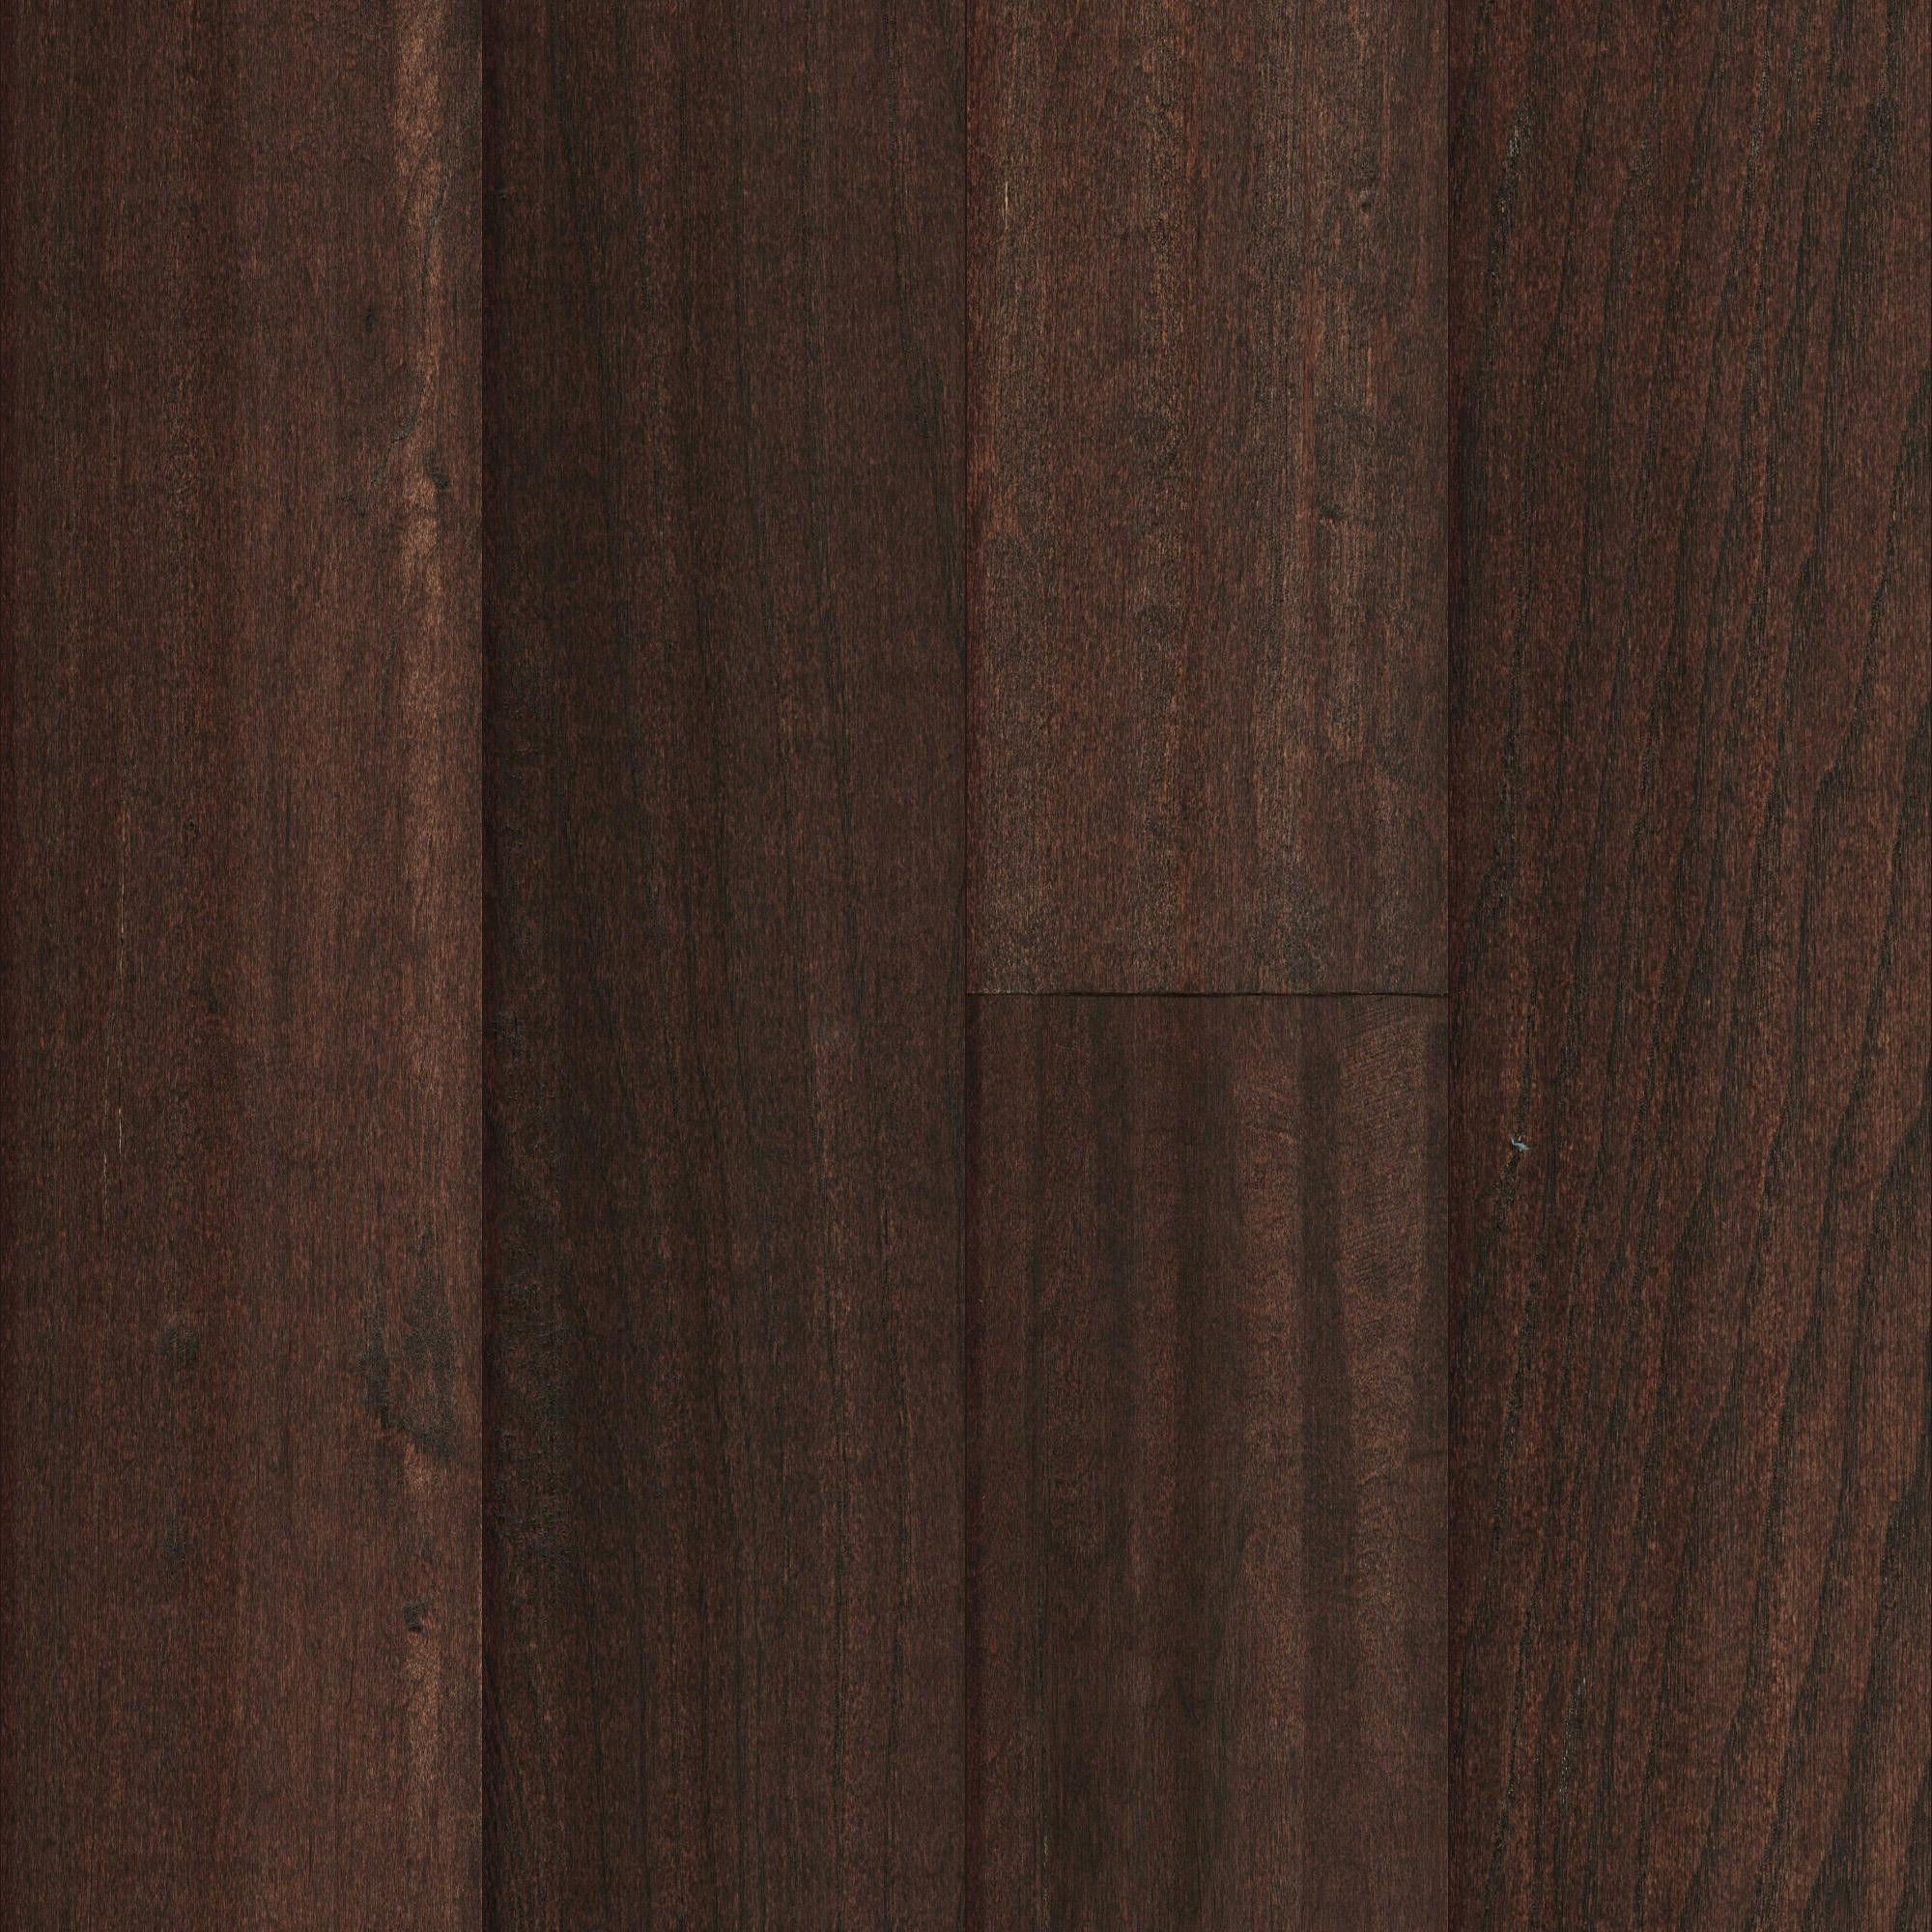 25 Lovely Bruce Hardwood Flooring Lumber Liquidators 2024 free download bruce hardwood flooring lumber liquidators of mullican lincolnshire sculpted maple cappuccino 5 engineered intended for mullican lincolnshire sculpted maple cappuccino 5 engineered hardwood 